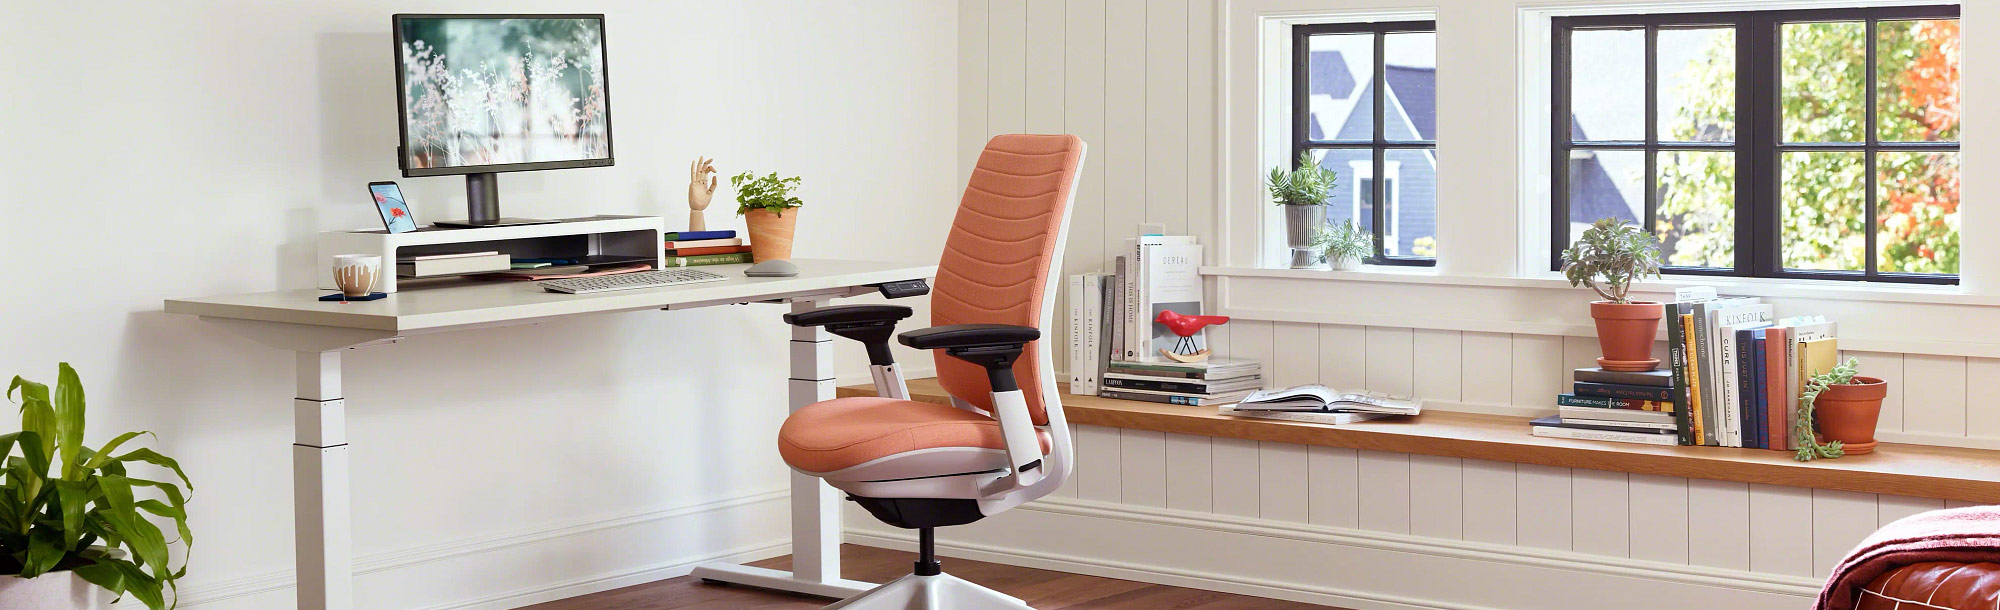 Orange chair and white desk in office